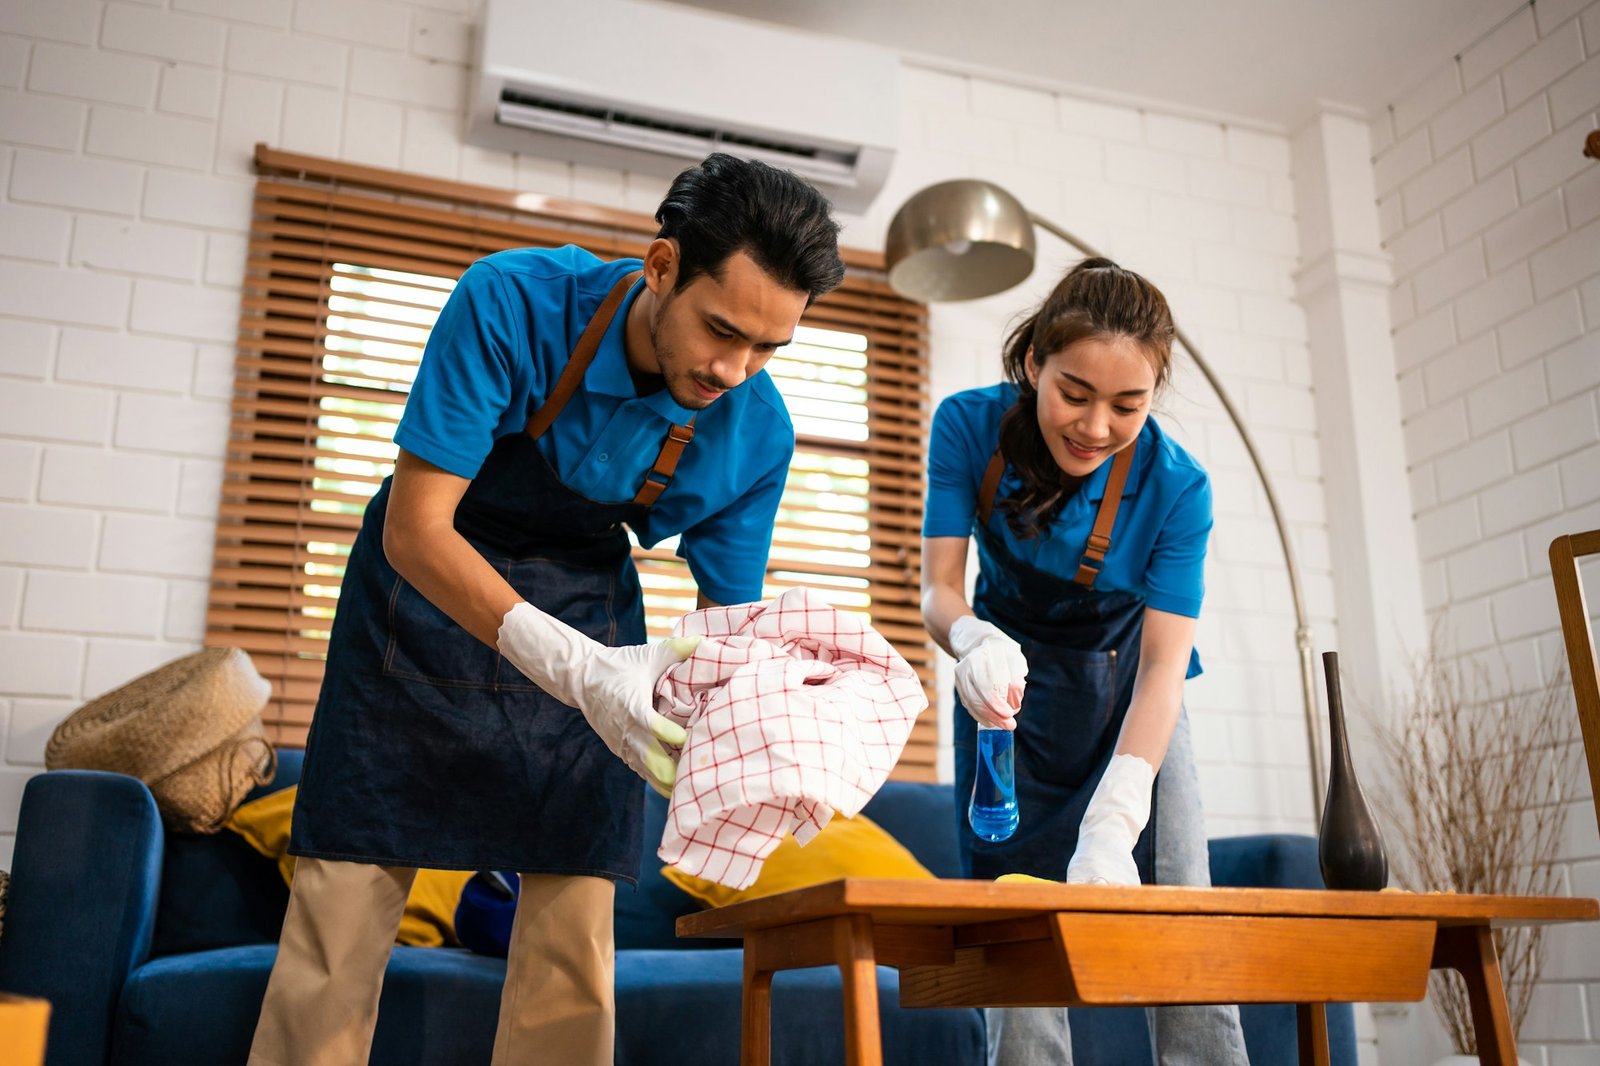 Asian young man and woman cleaning service worker work in living room. A